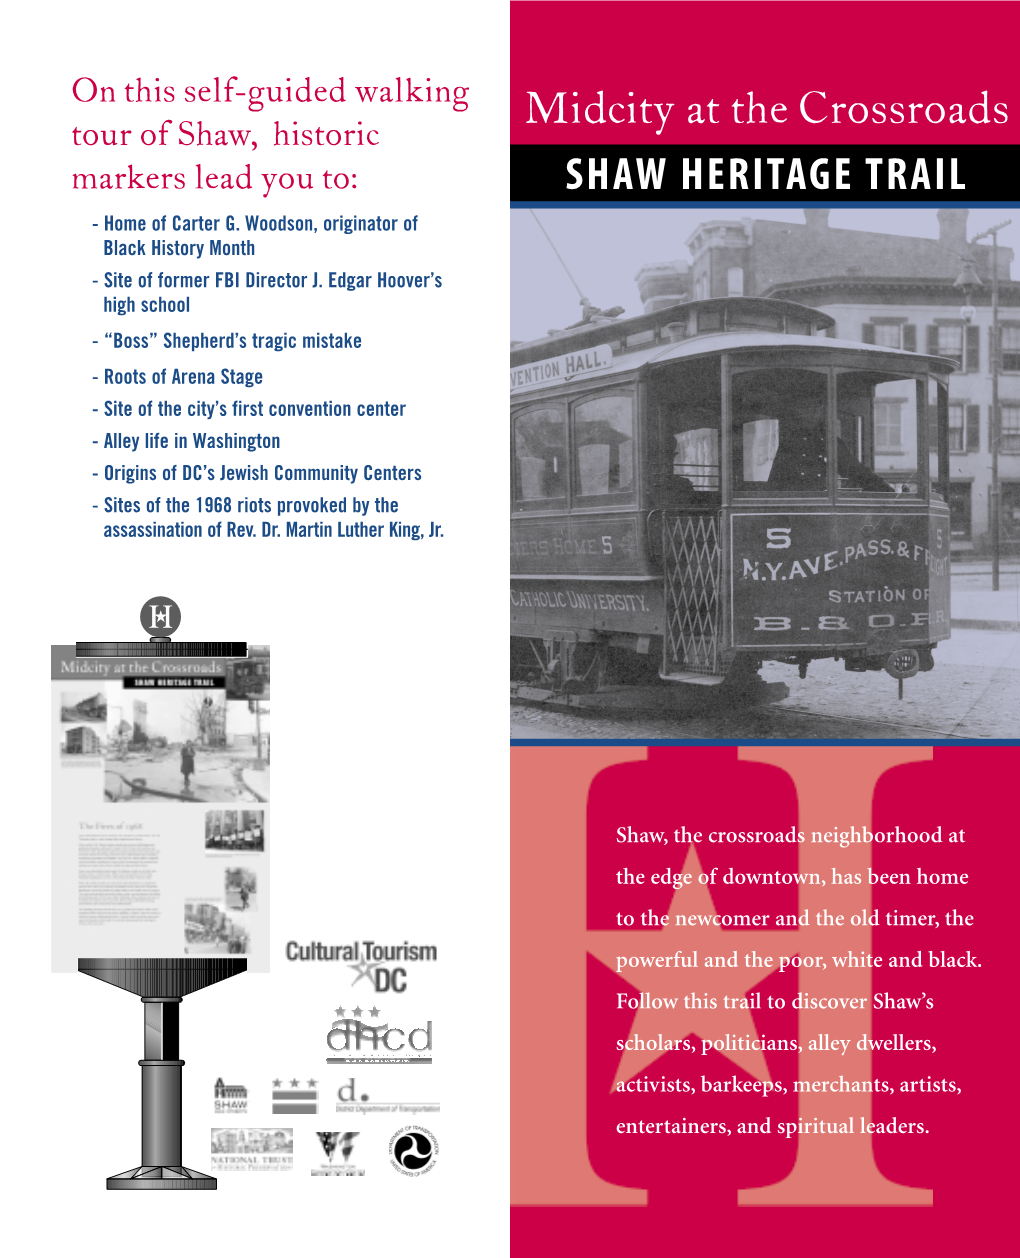 Midcity at the Crossroads: Shaw Heritage Trail